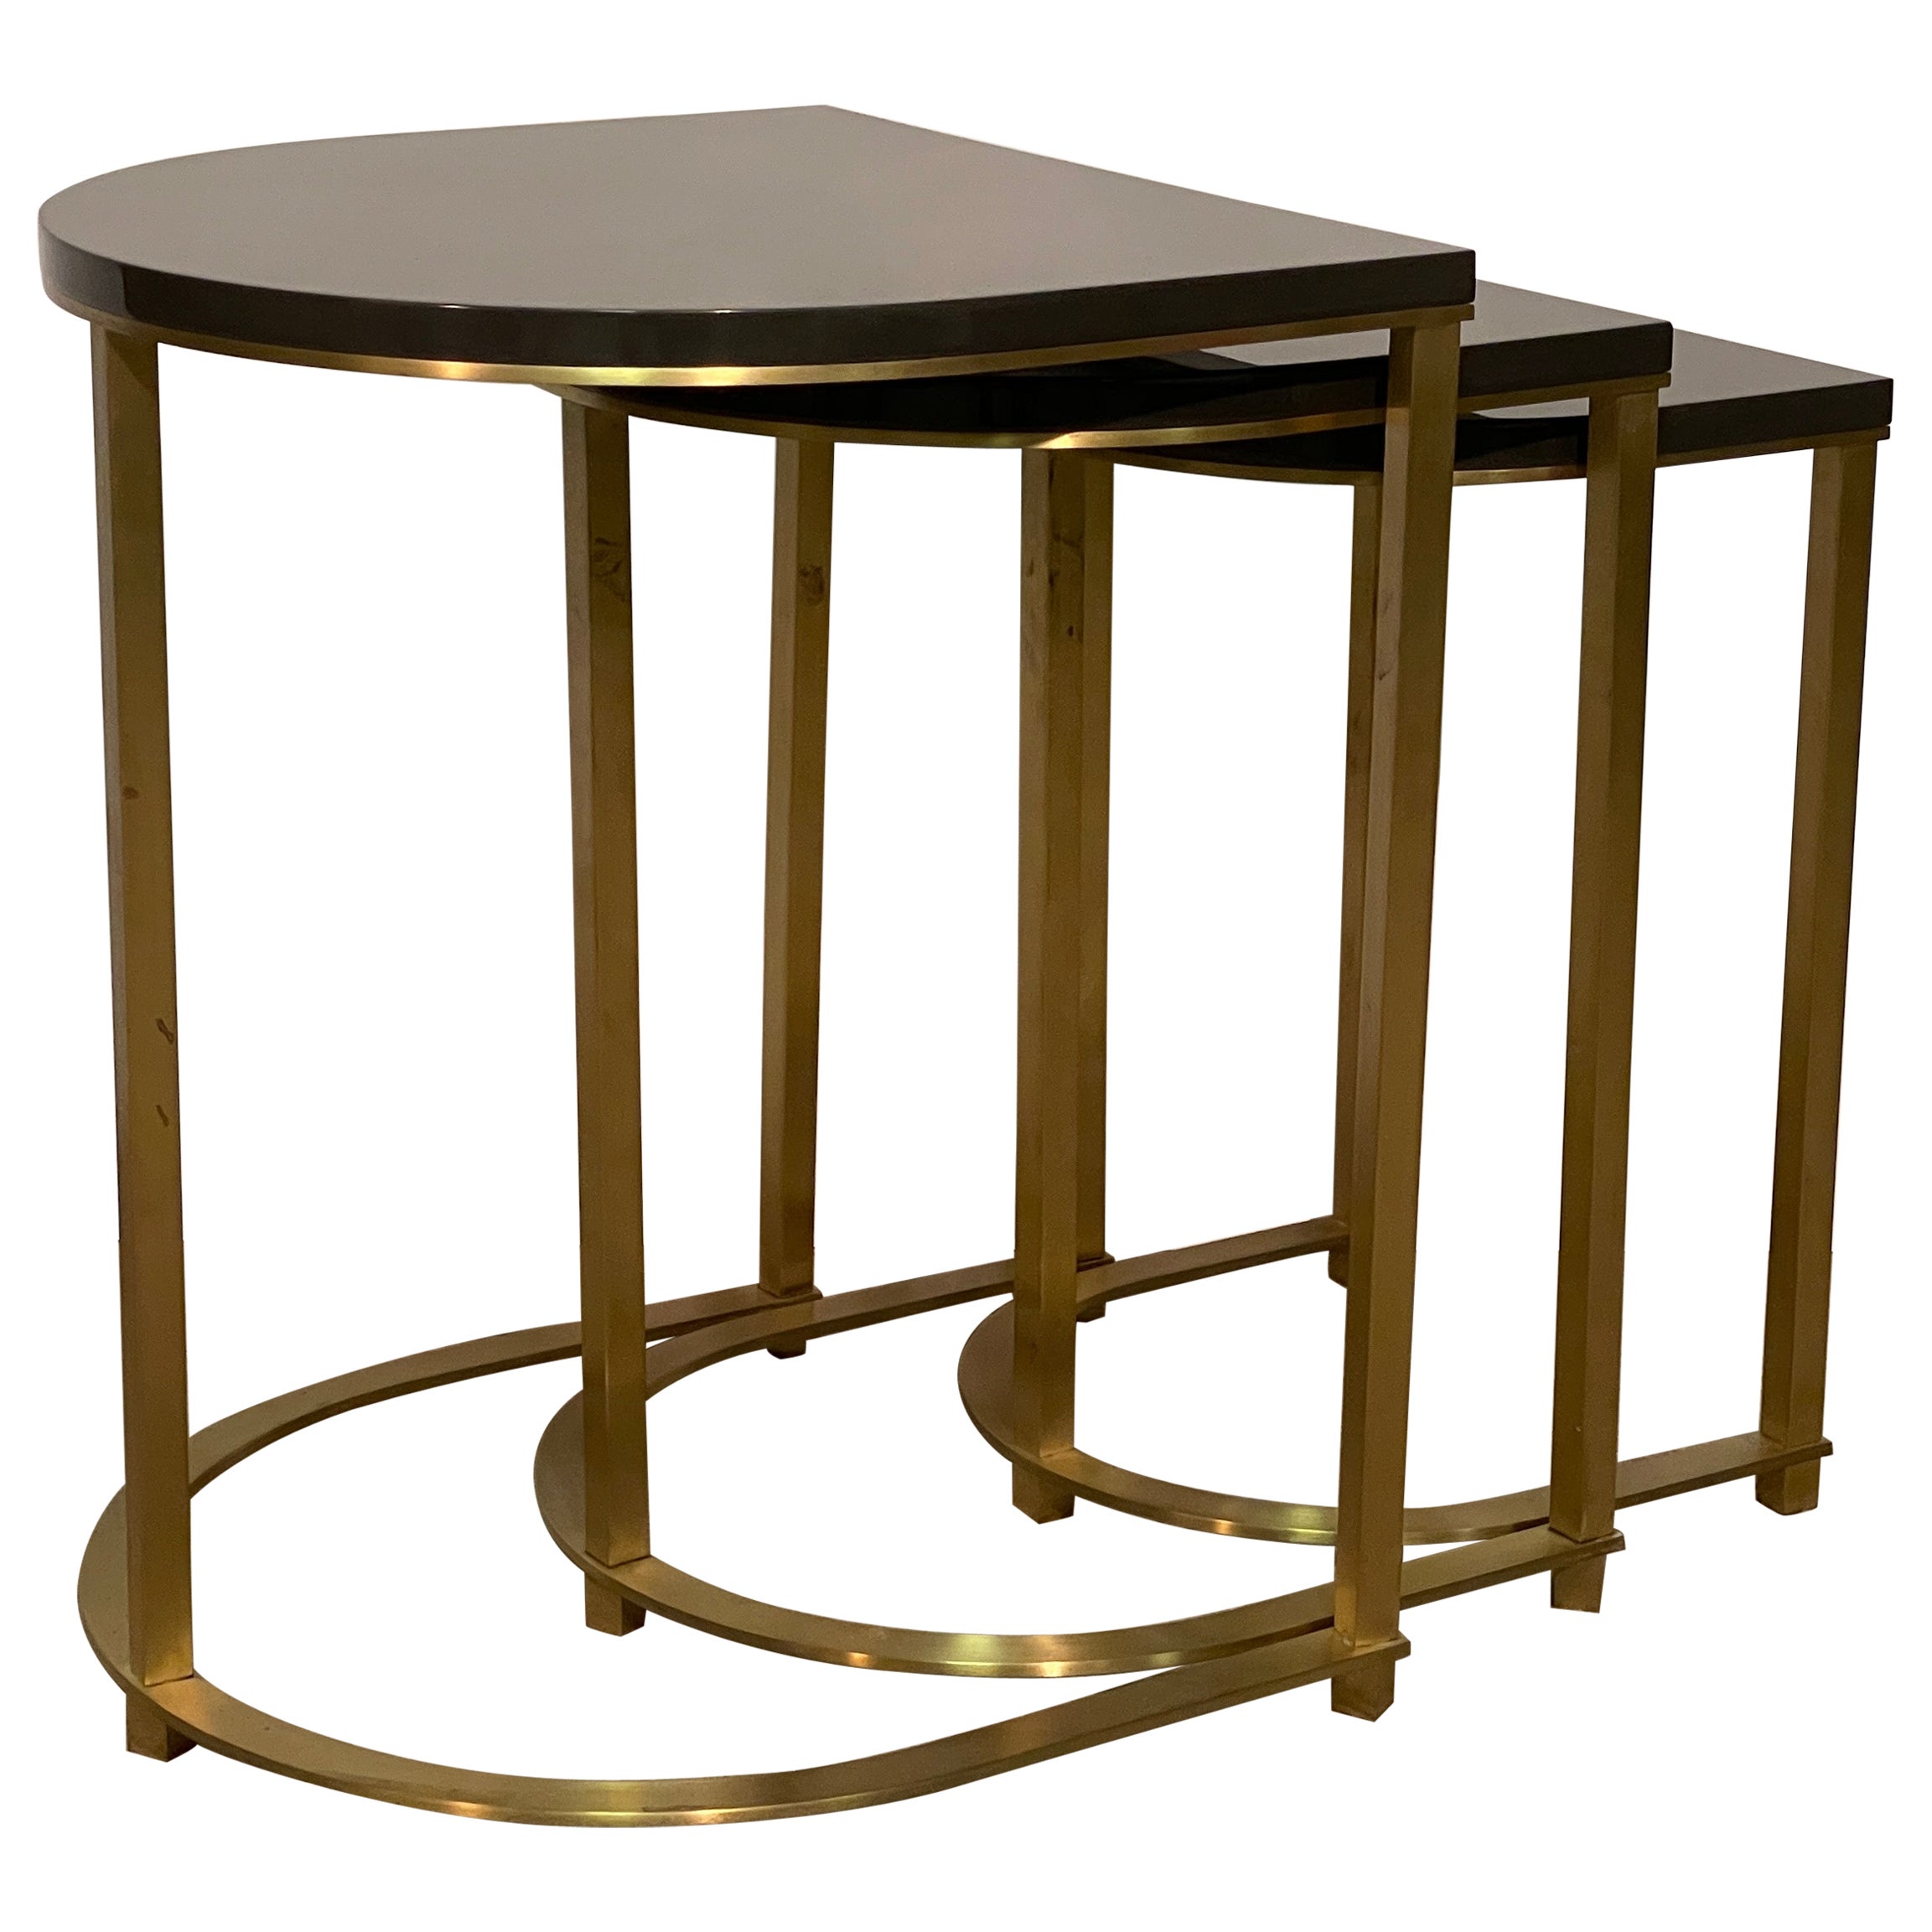 Jean de Merry Nesting Tables and Stacking Tables